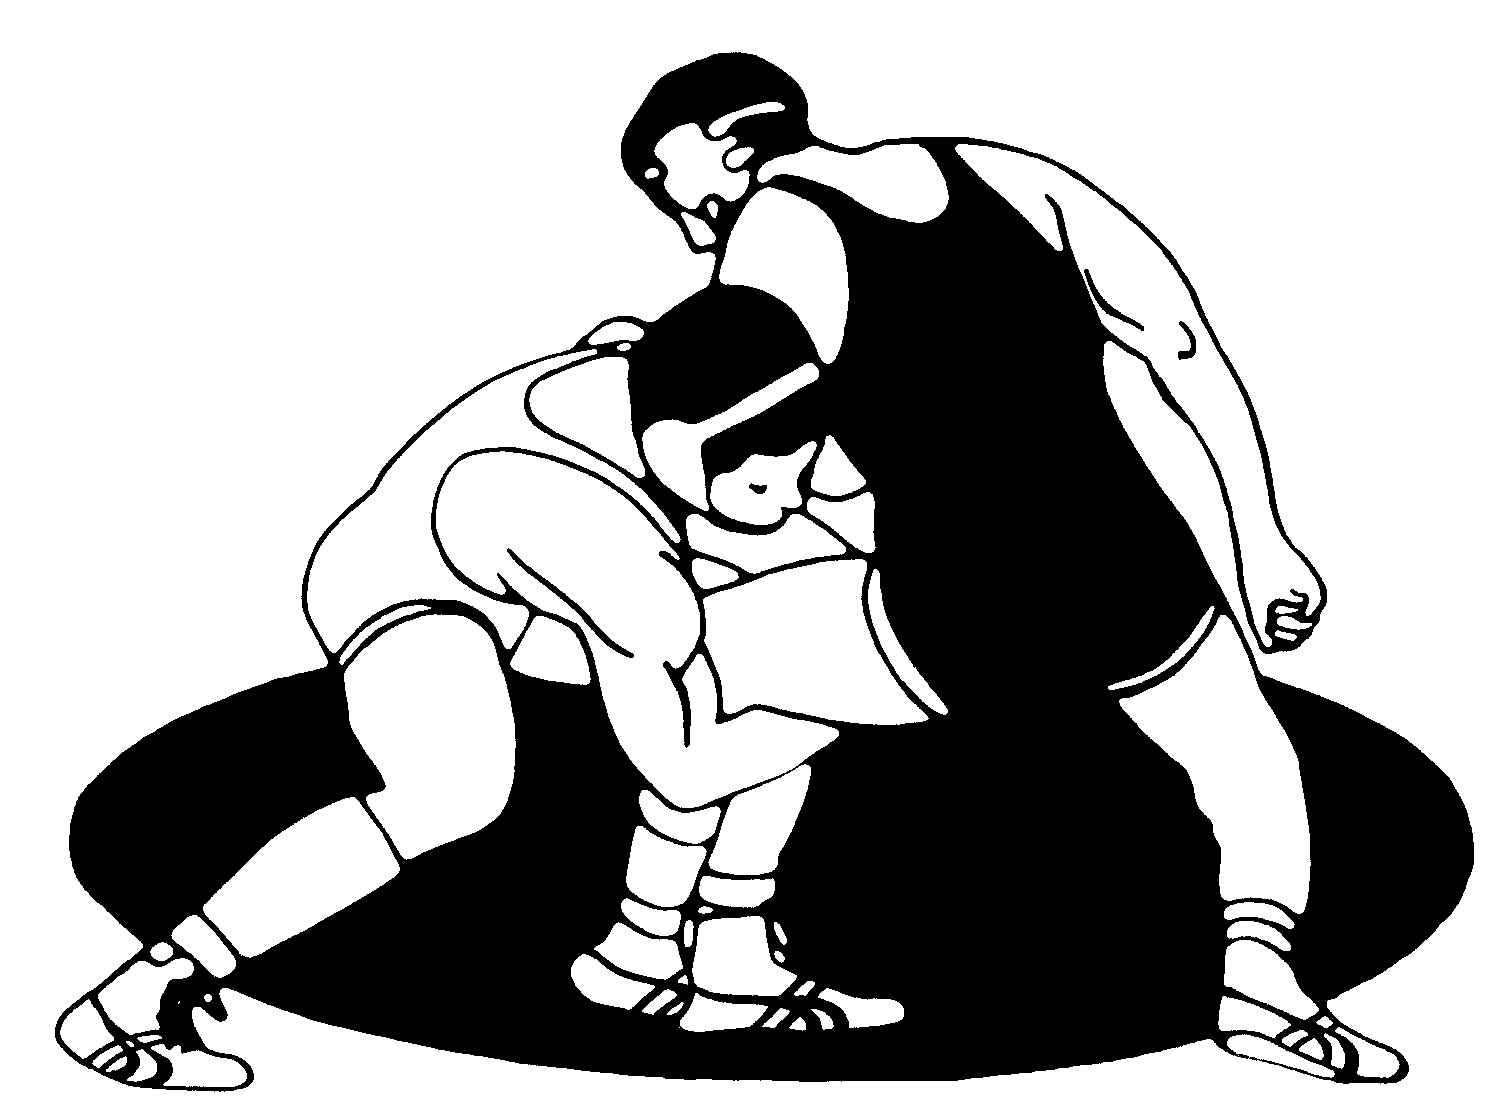 Wrestlers clipart two. Free girl wrestling cliparts